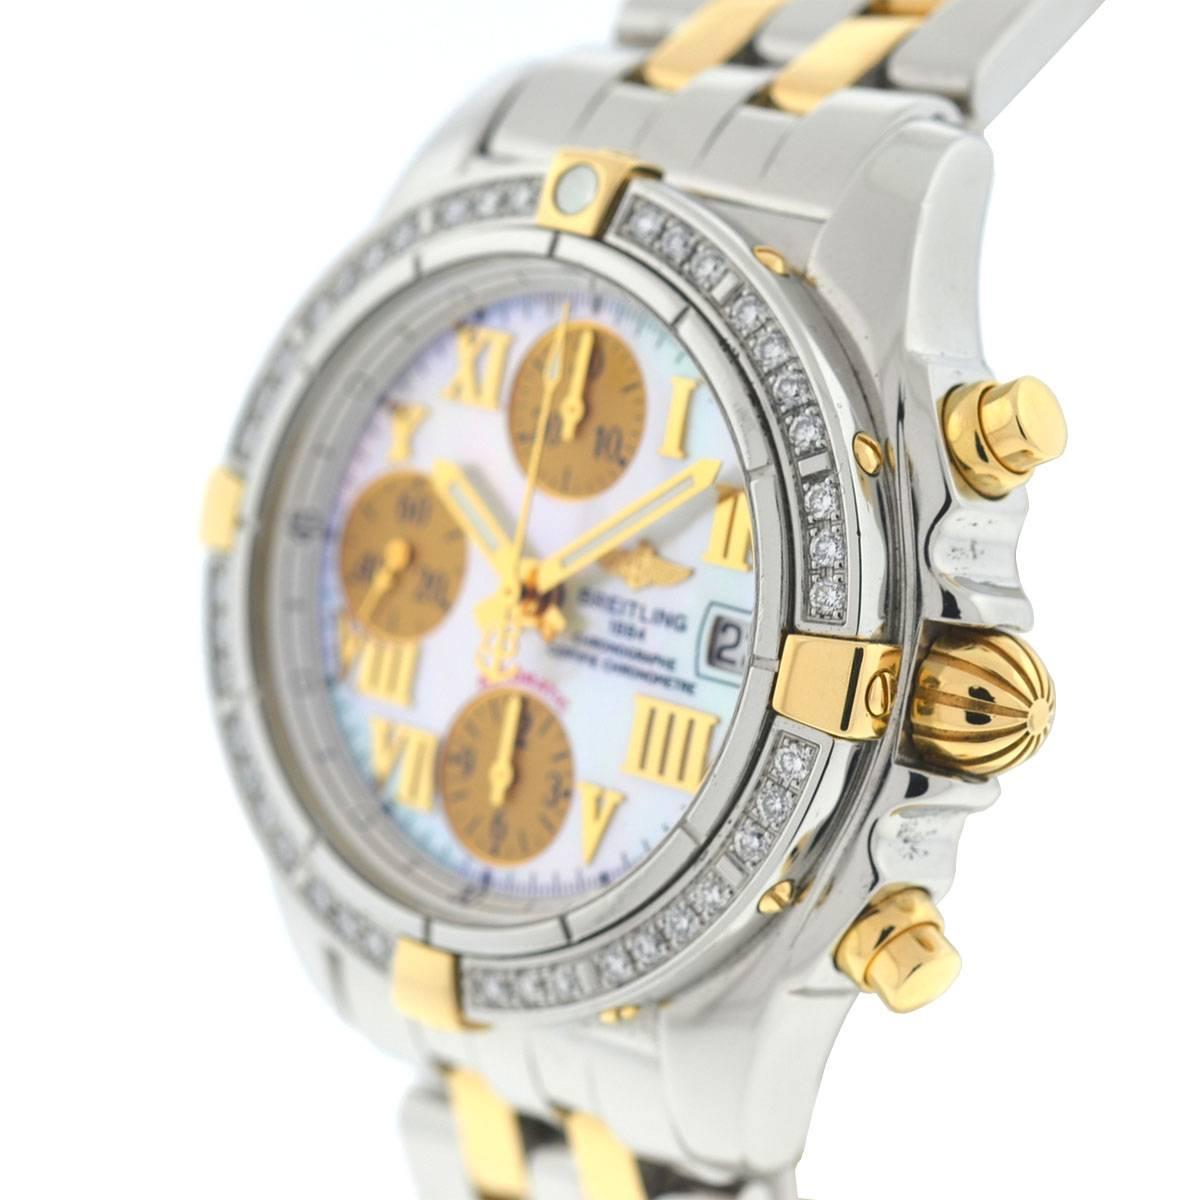 Company - Breitling
Style - Luxury Sport Watch
Model - Chrono Cockpit
Reference Number - B13358
Case Metal - Stainless Steel
Case Measurement - 39 mm
Bracelet - Two Tone - Fits a 7